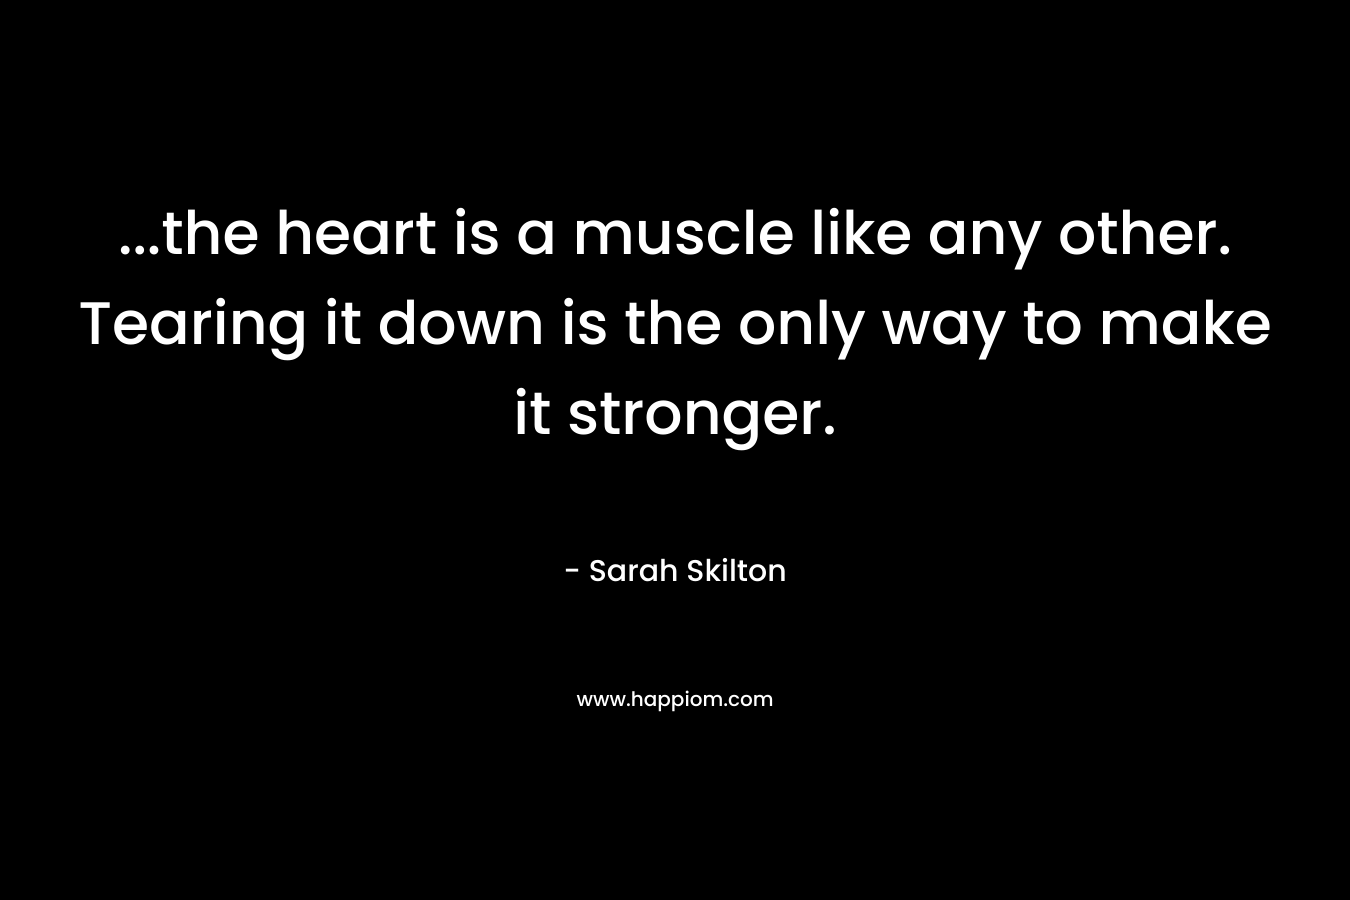 ...the heart is a muscle like any other. Tearing it down is the only way to make it stronger.